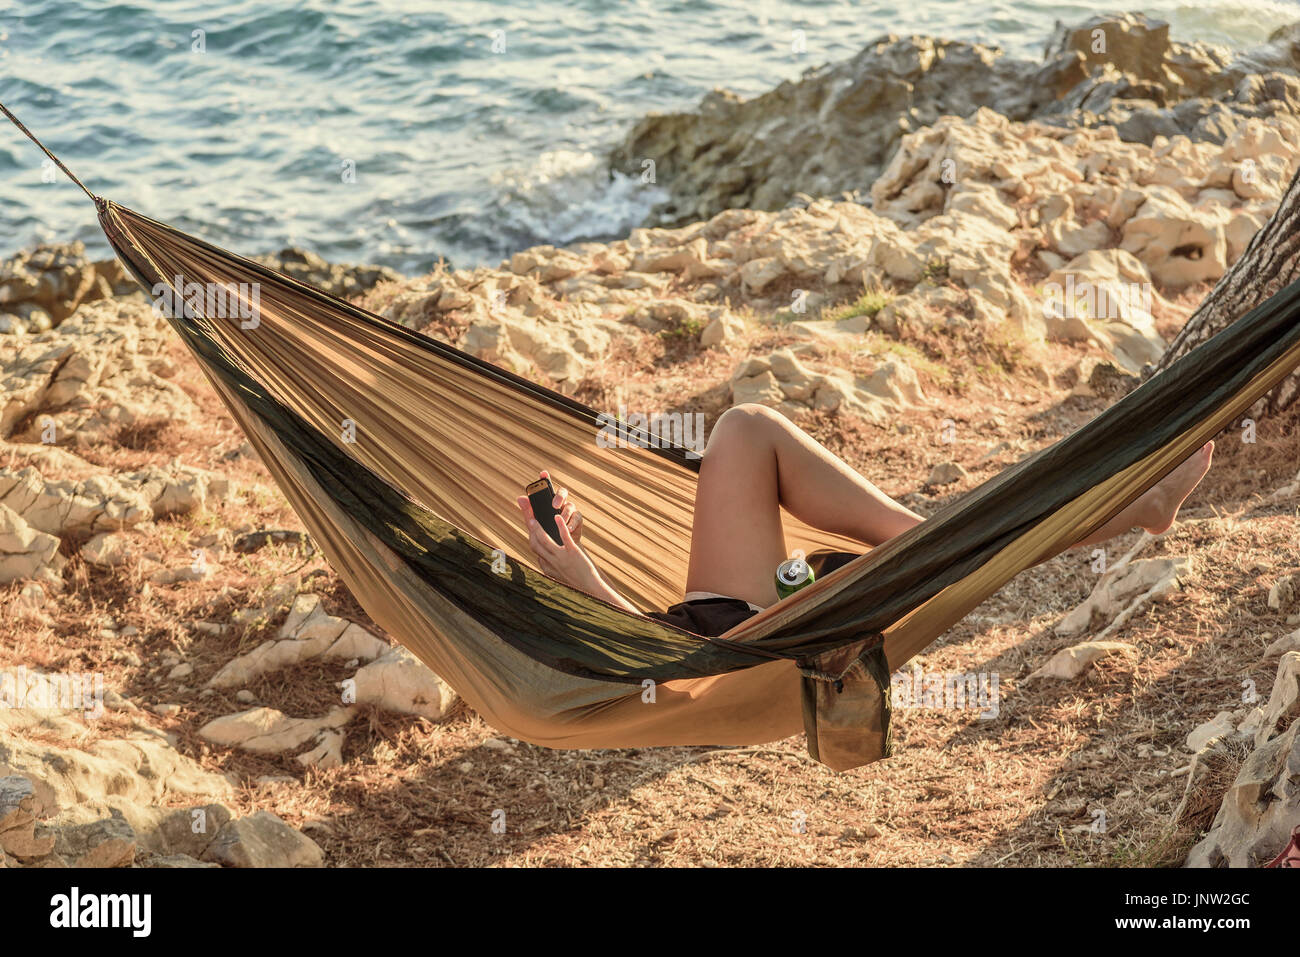 Young woman looking at mobile phone in hammock Stock Photo